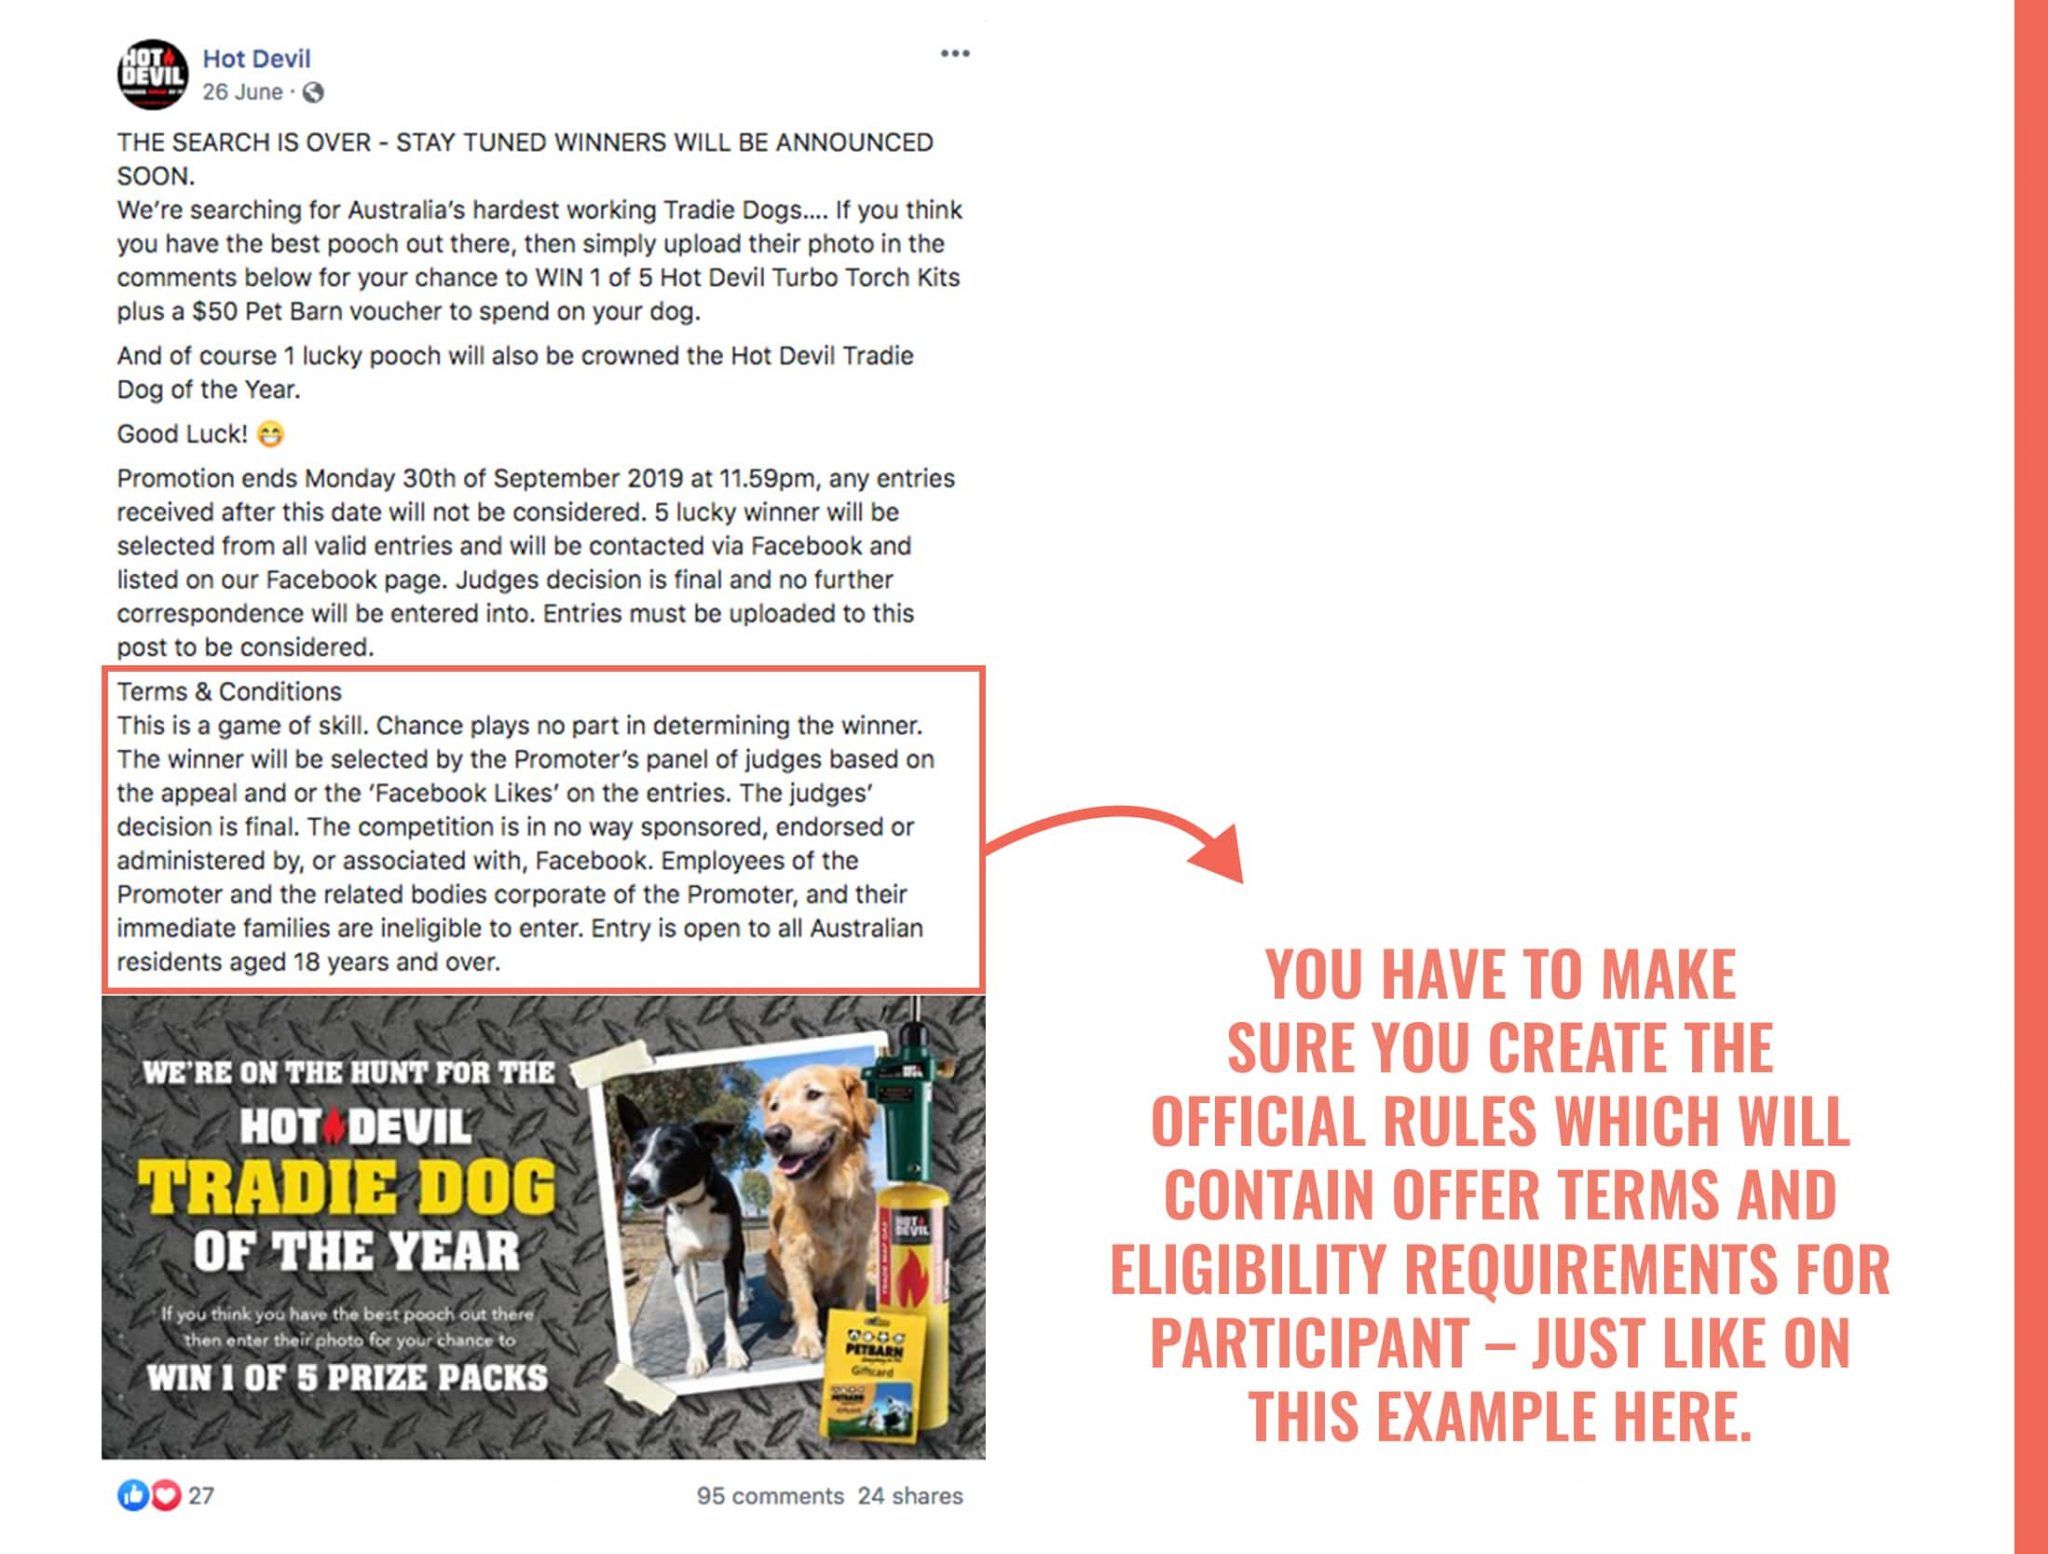 Facebook terms & conditions good example